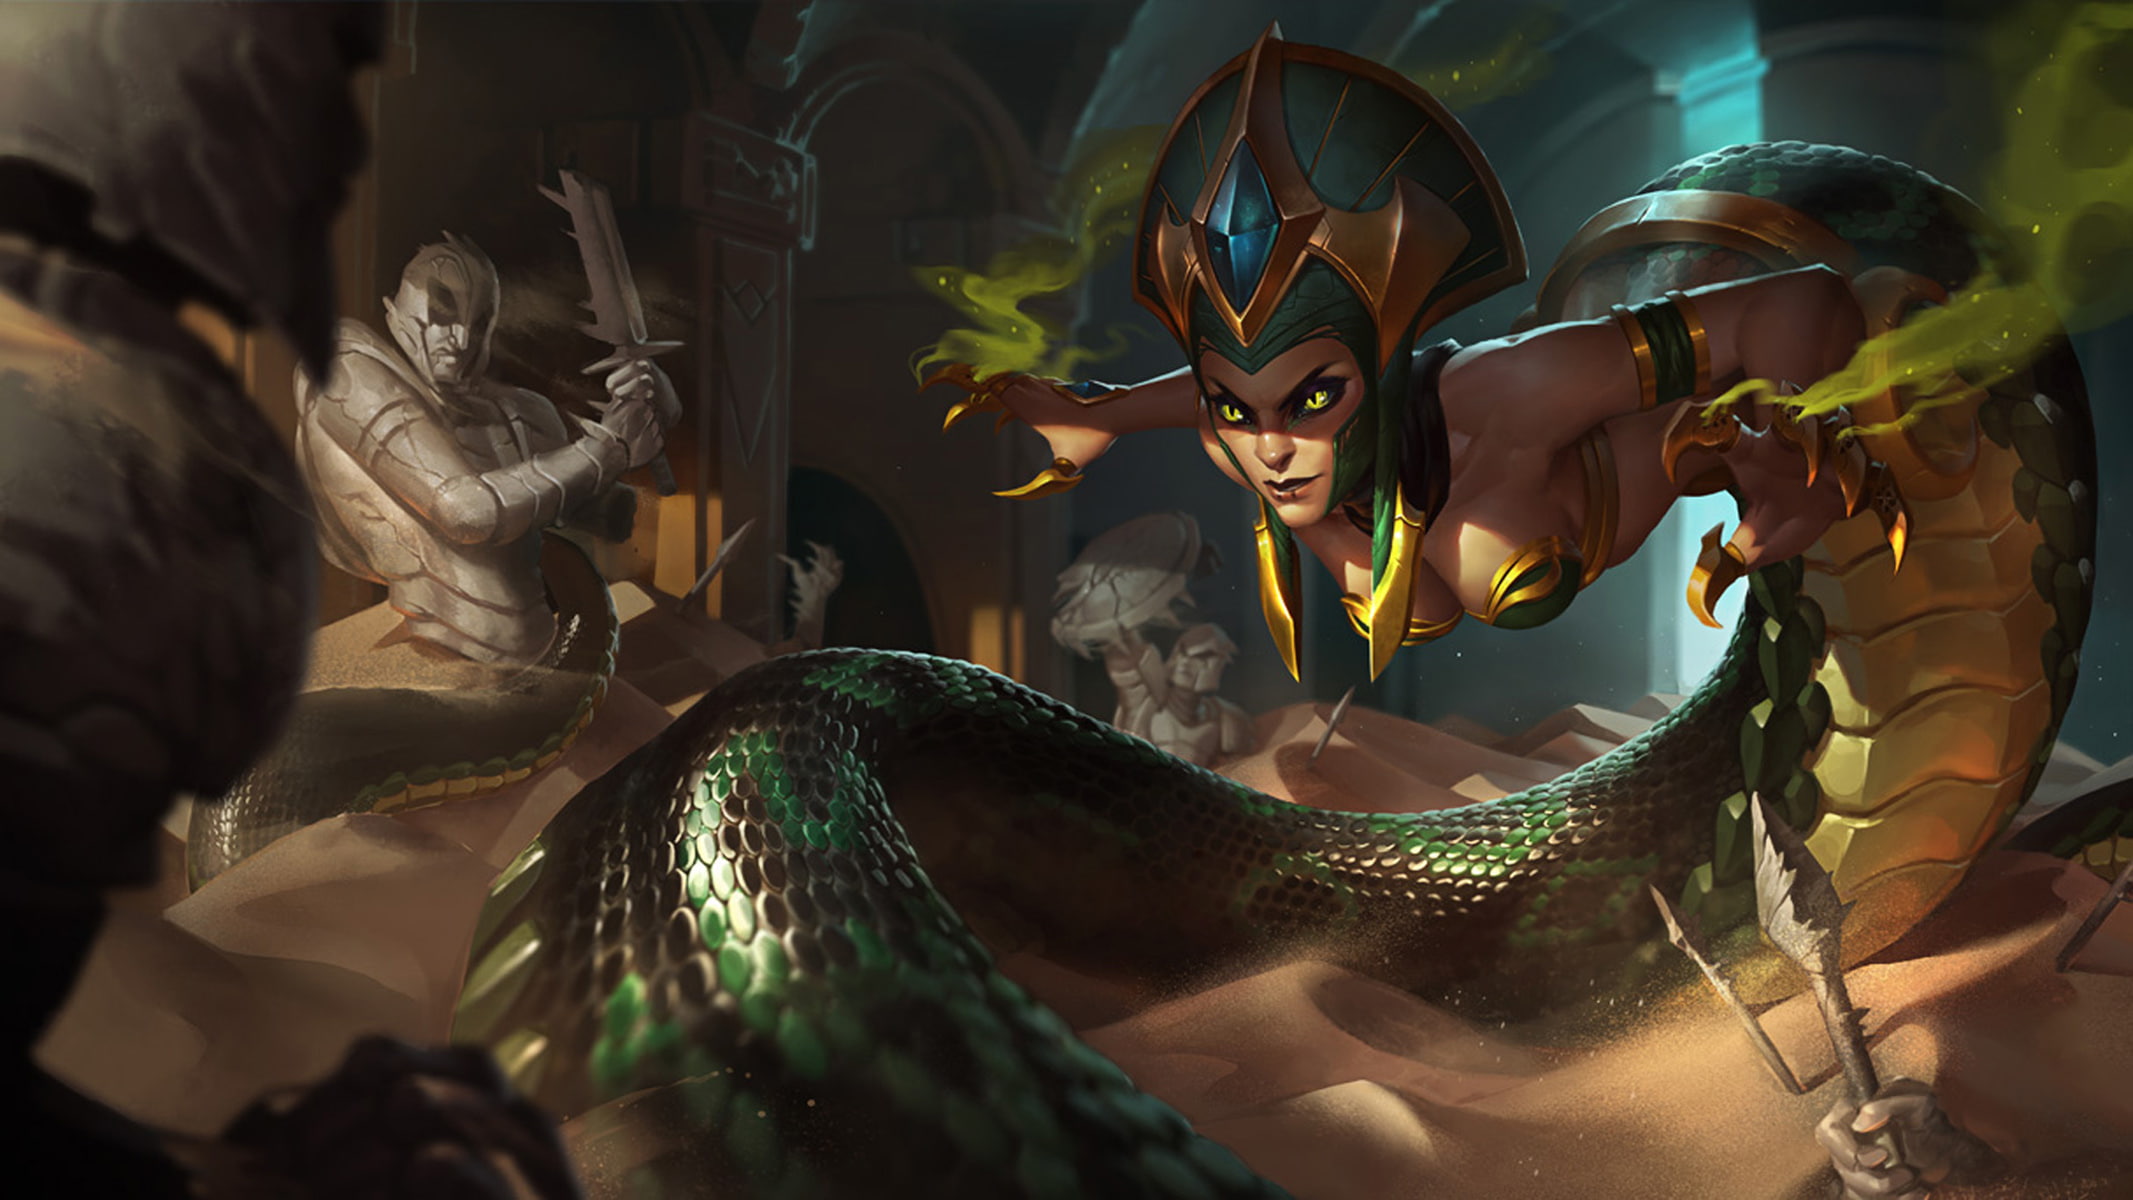 Cassiopeia-Girl snake-Splash Art-video game-League of Legends-full HD Wallpapers-2133×1200